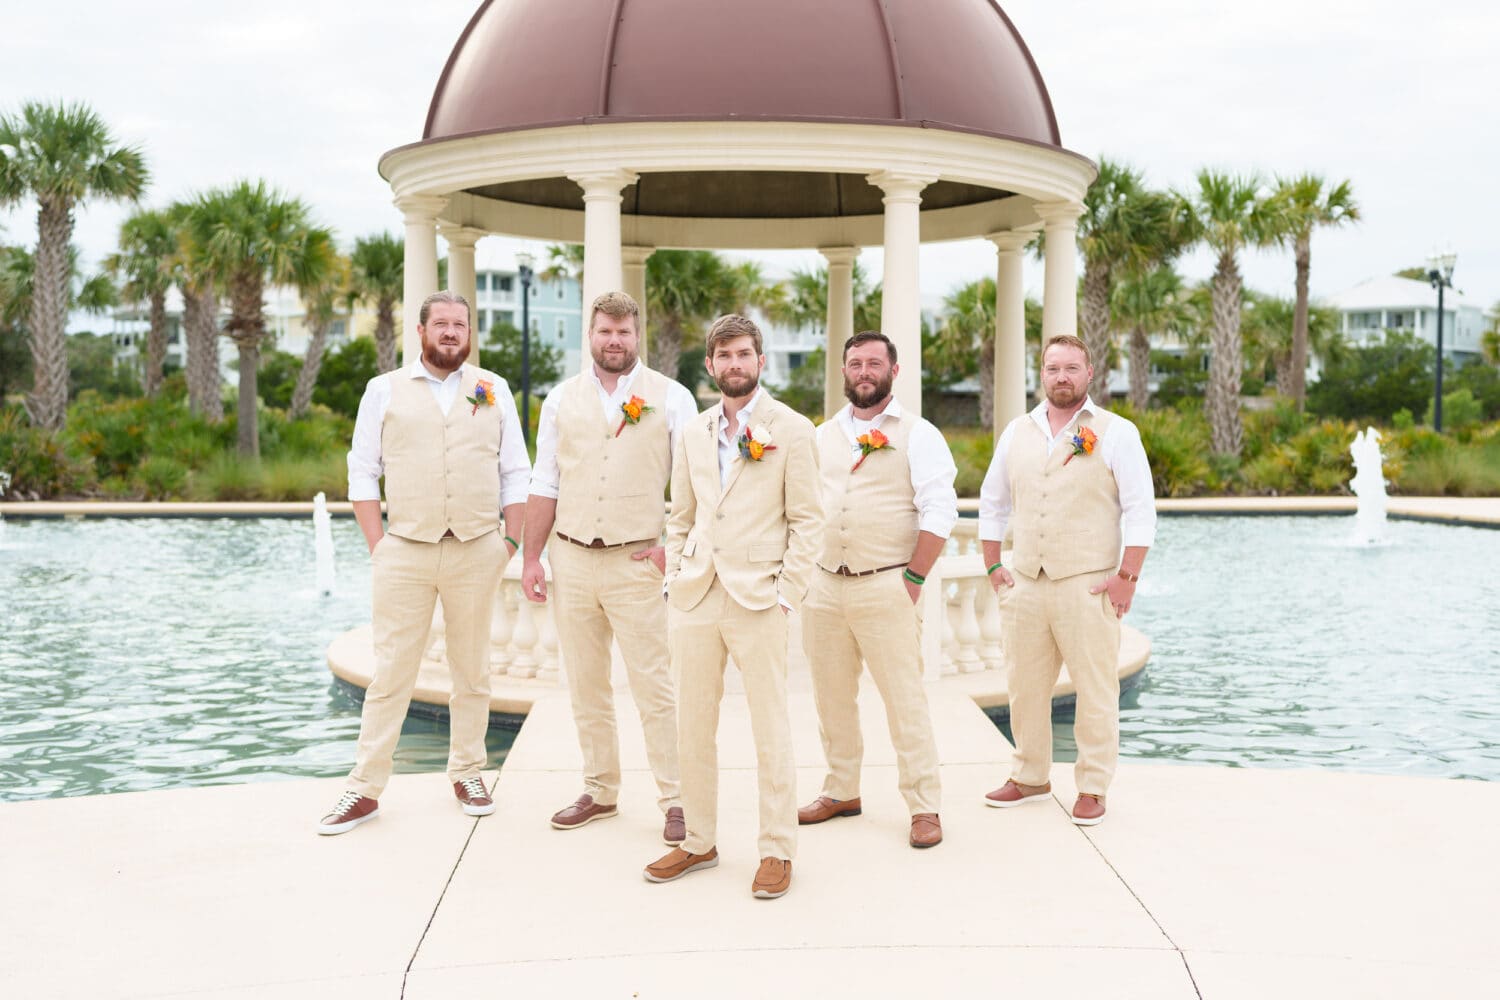 Groomsmen with the groom - 21 Main Events - North Myrtle Beach